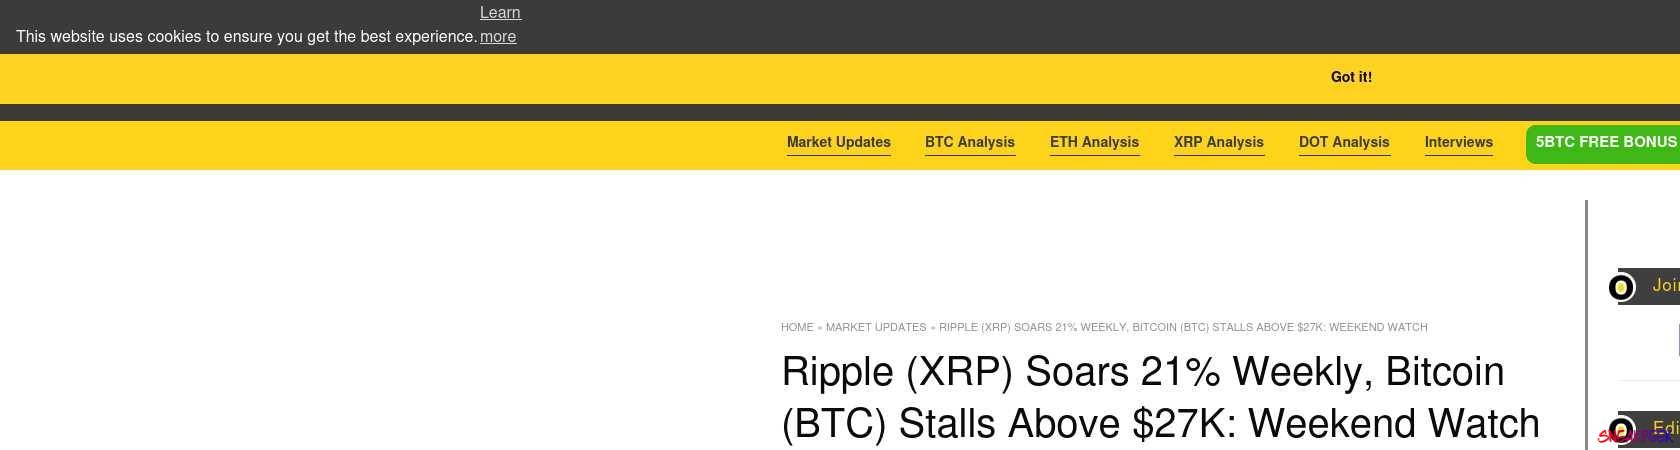 Read the full Article:  ⭲ Ripple (XRP) Soars 21% Weekly, Bitcoin (BTC) Stalls Above $27K: Weekend Watch